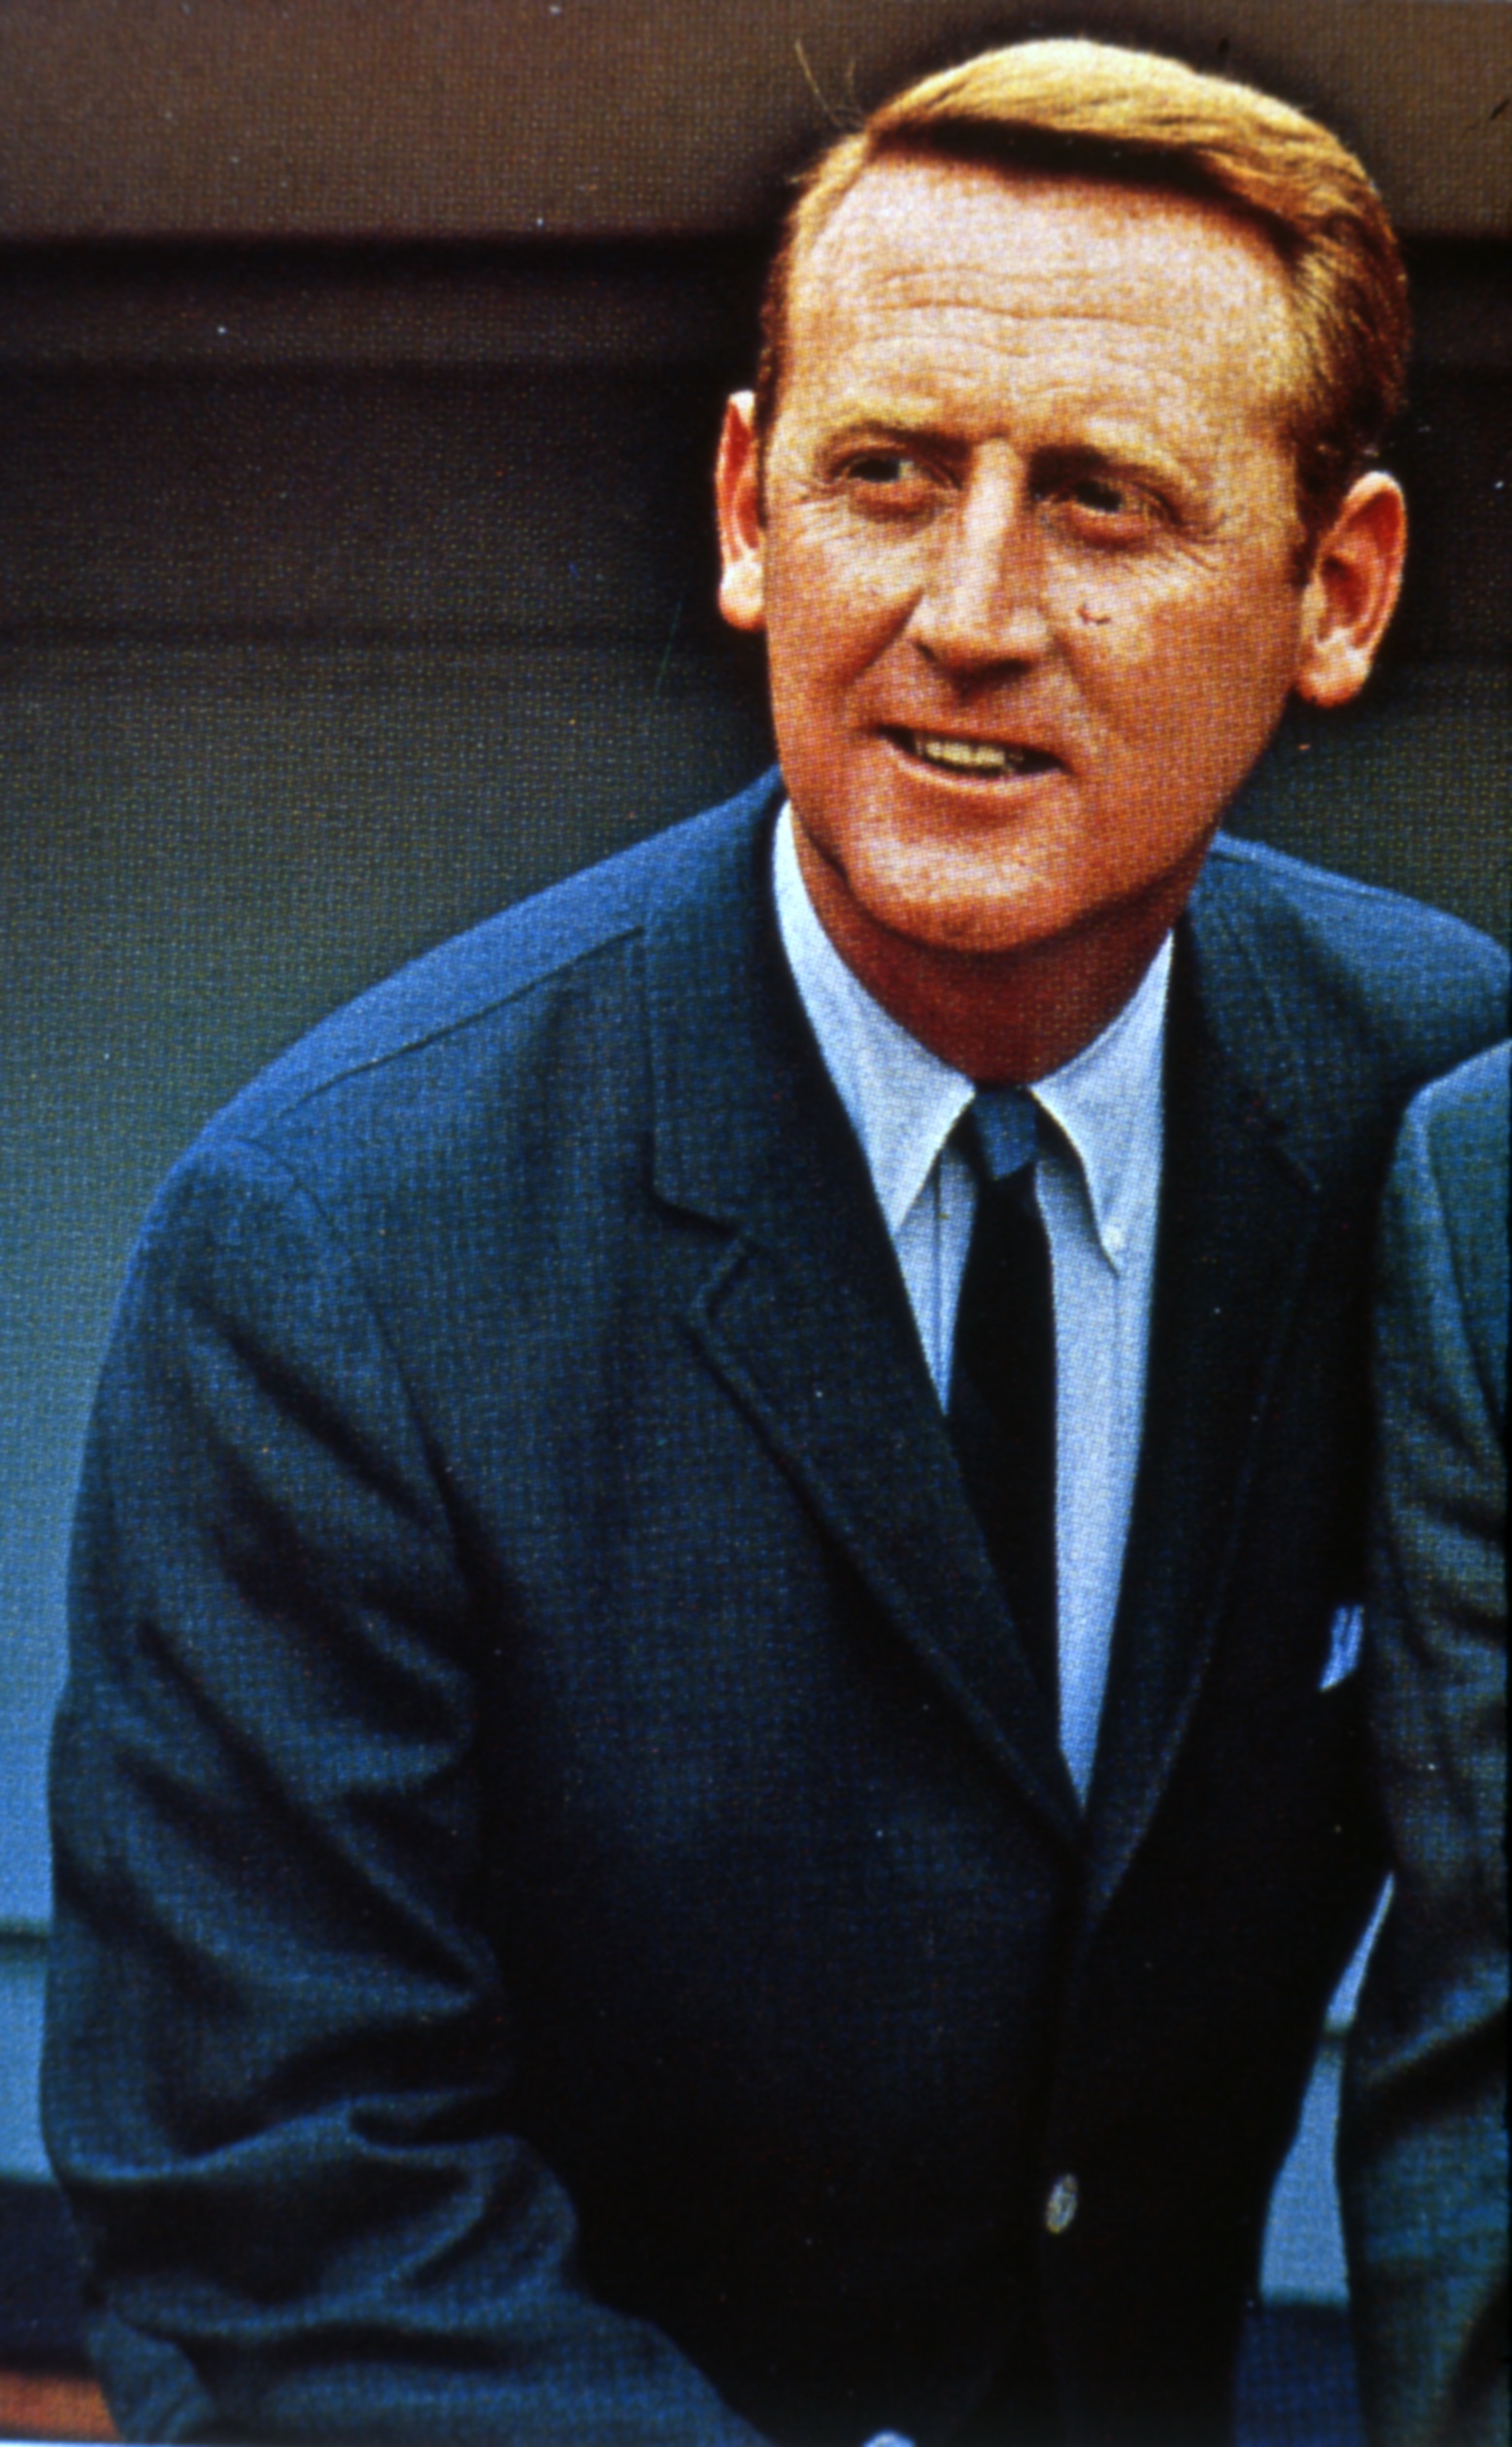 Vin Scully (SABR-Rucker Archive)